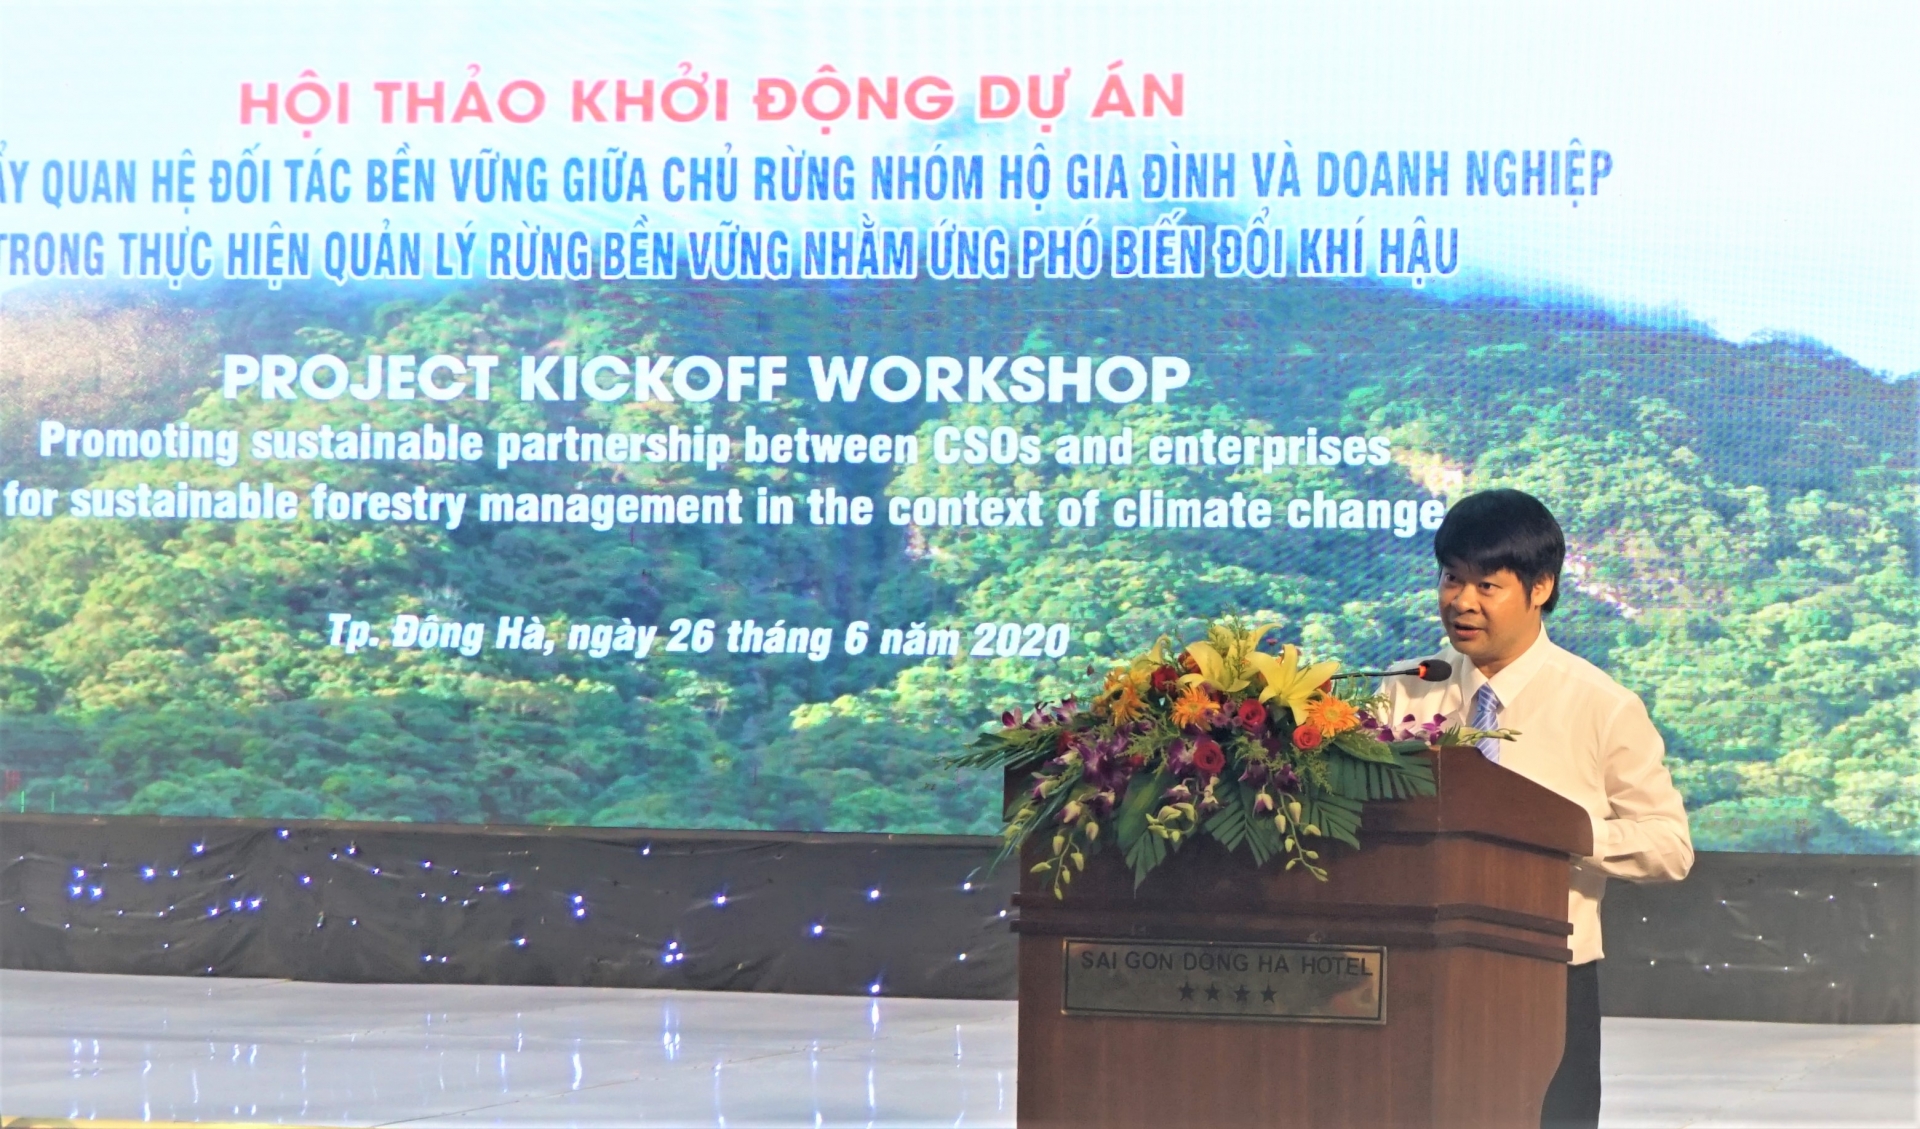 eu mcnv promote sustainable forest management in the context of climate change in quang tri 21726